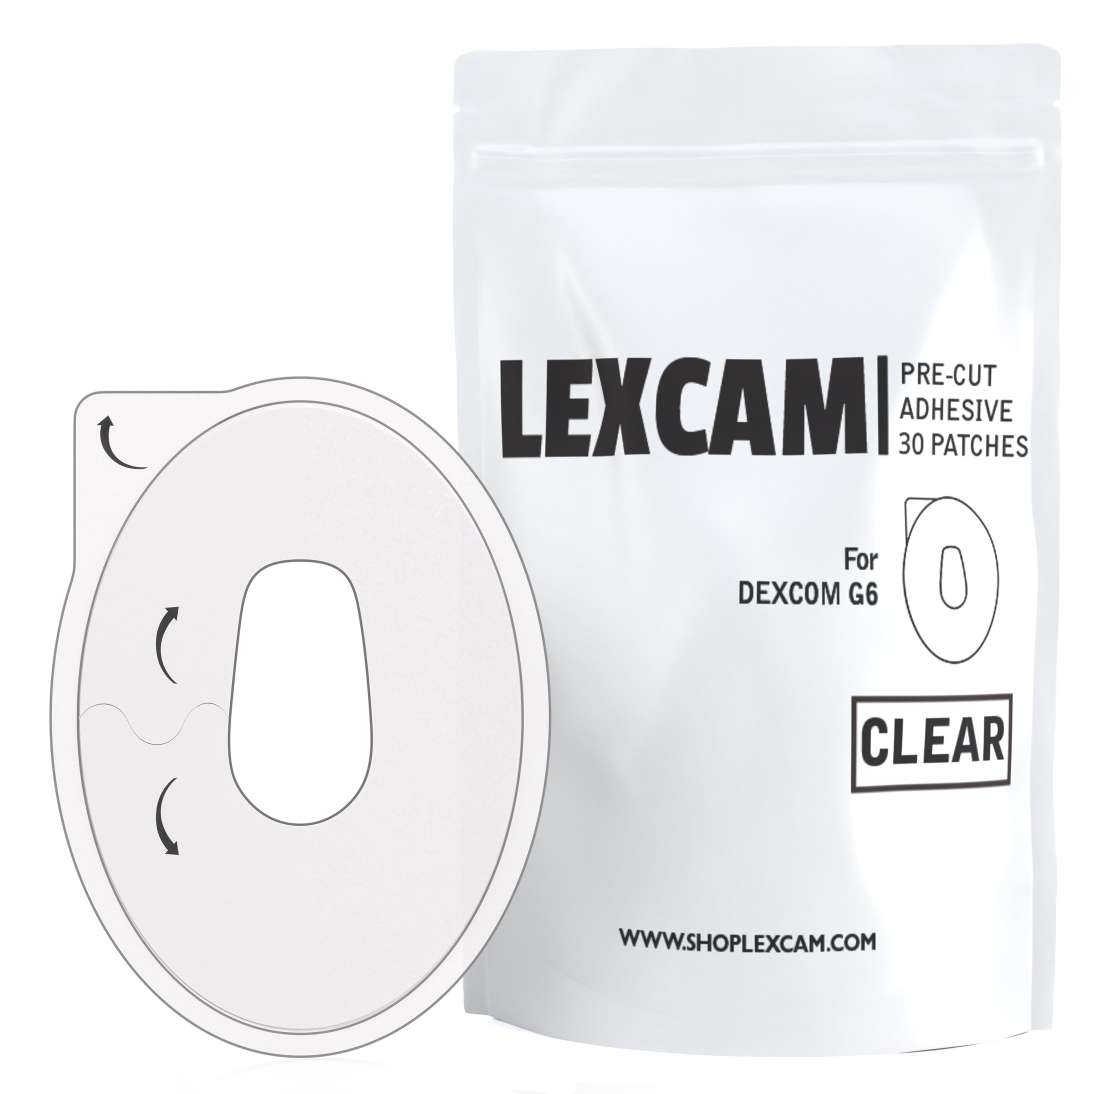 Lexcam Adhesive Waterproof  Patches Pre-Cut for Dexcom G6, Color Clear (30)